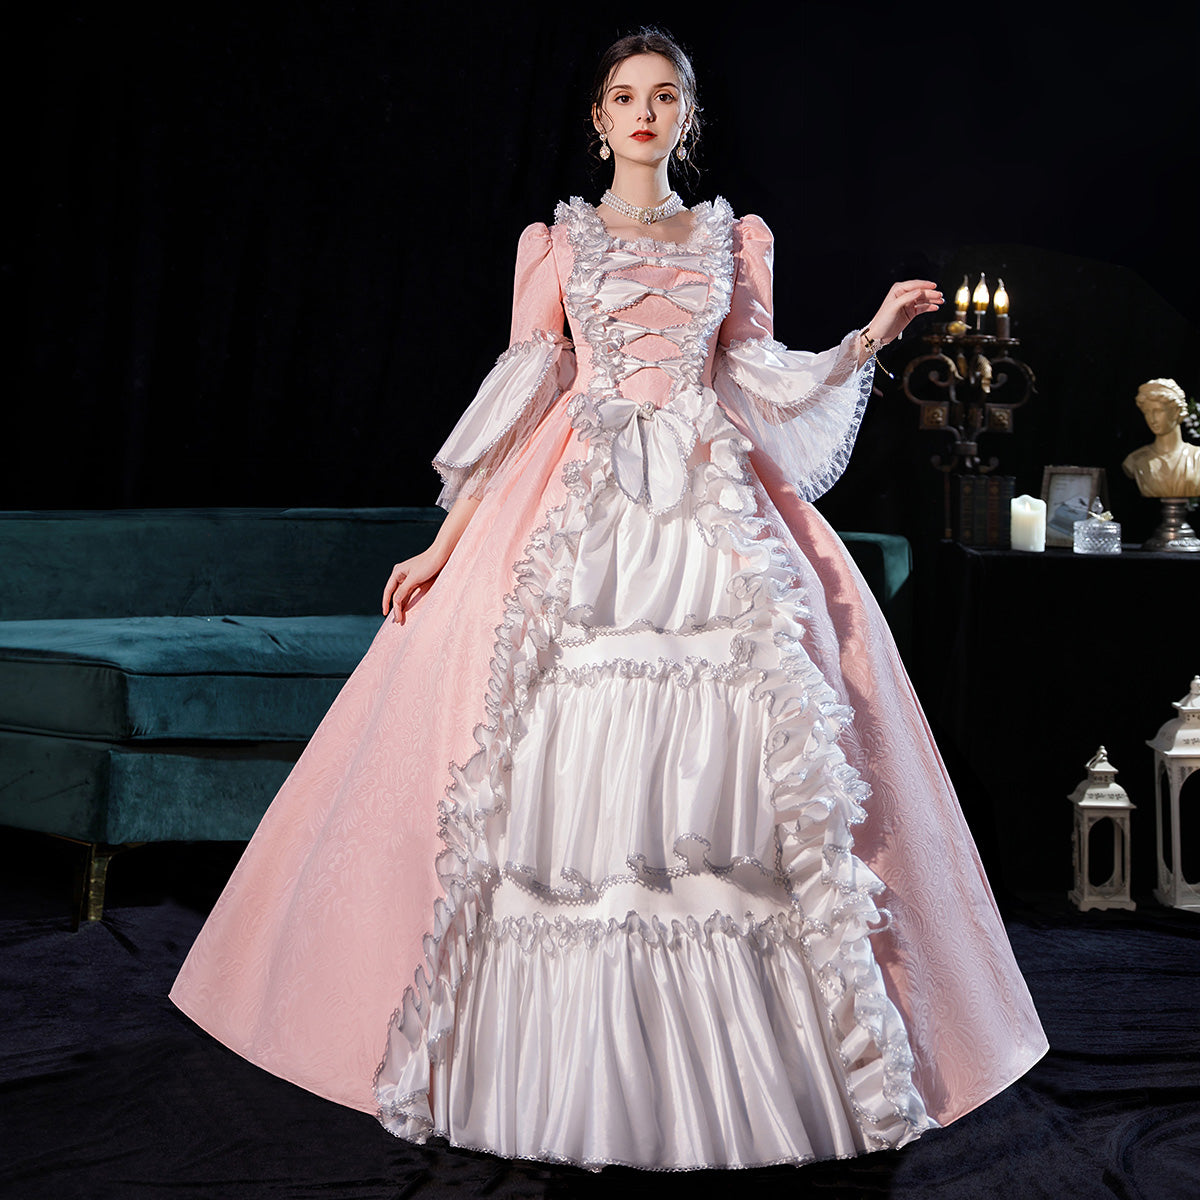 Pink Rococo Victorian Marie Antoinette Dress Gown